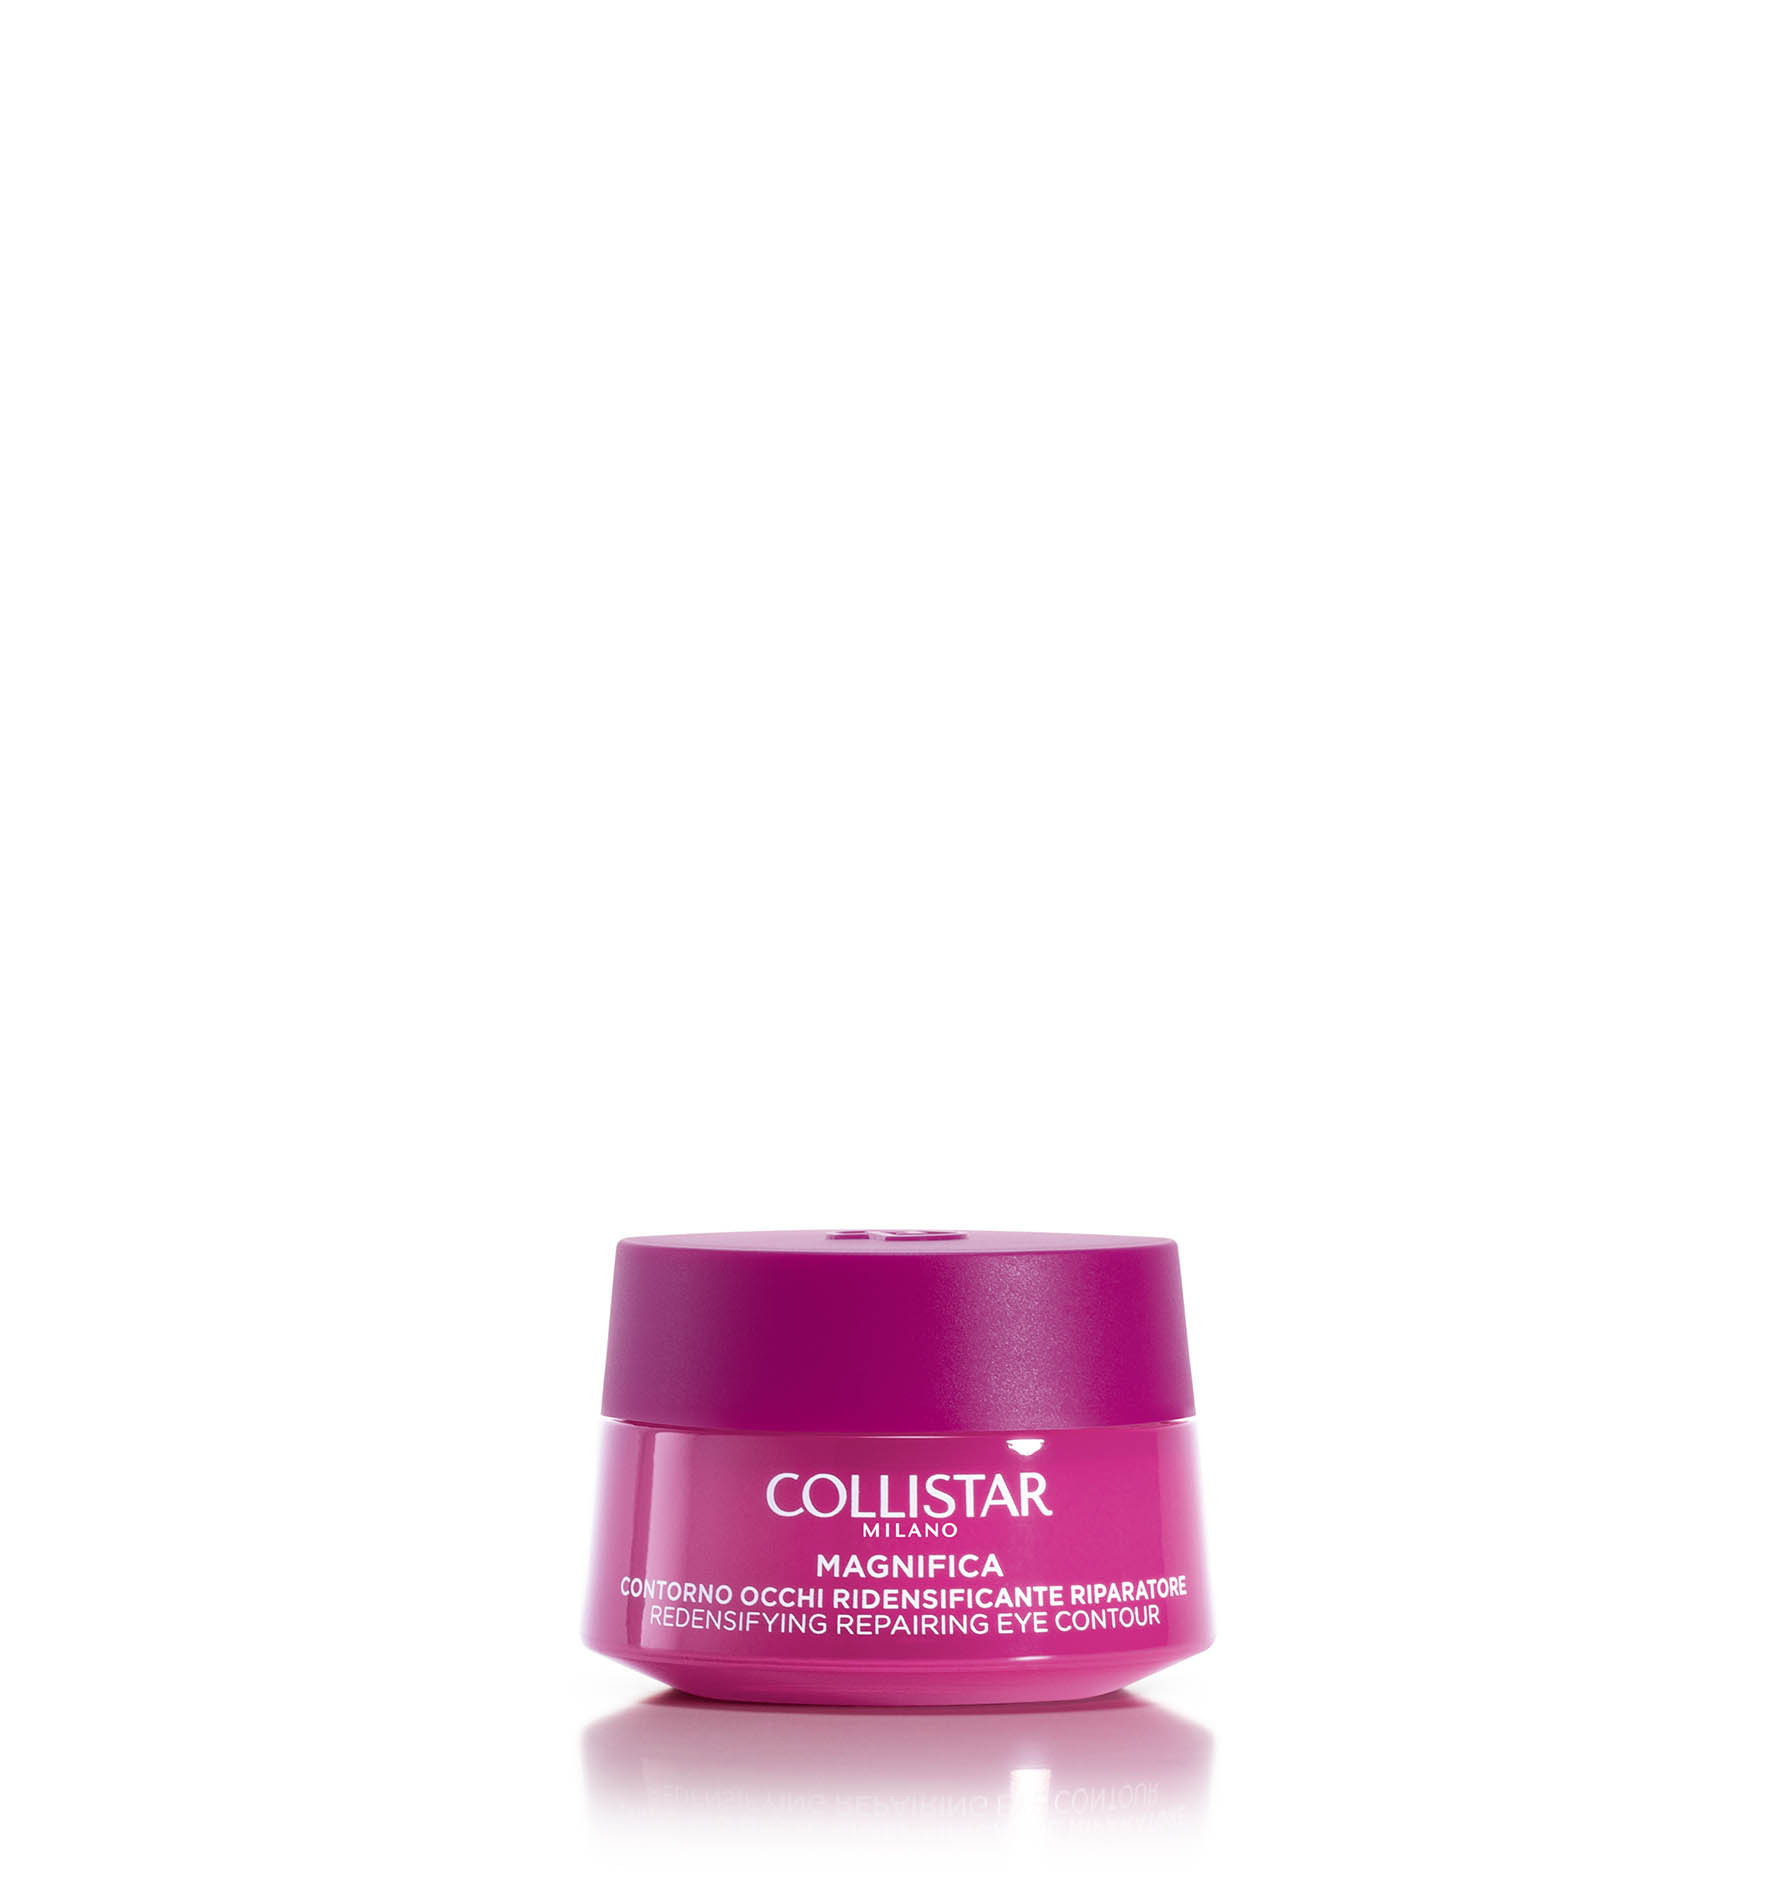 MAGNIFICA REDENSIFYING REPAIRING EYE CONTOUR - Loss of tone and compactness | Collistar - Shop Online Ufficiale